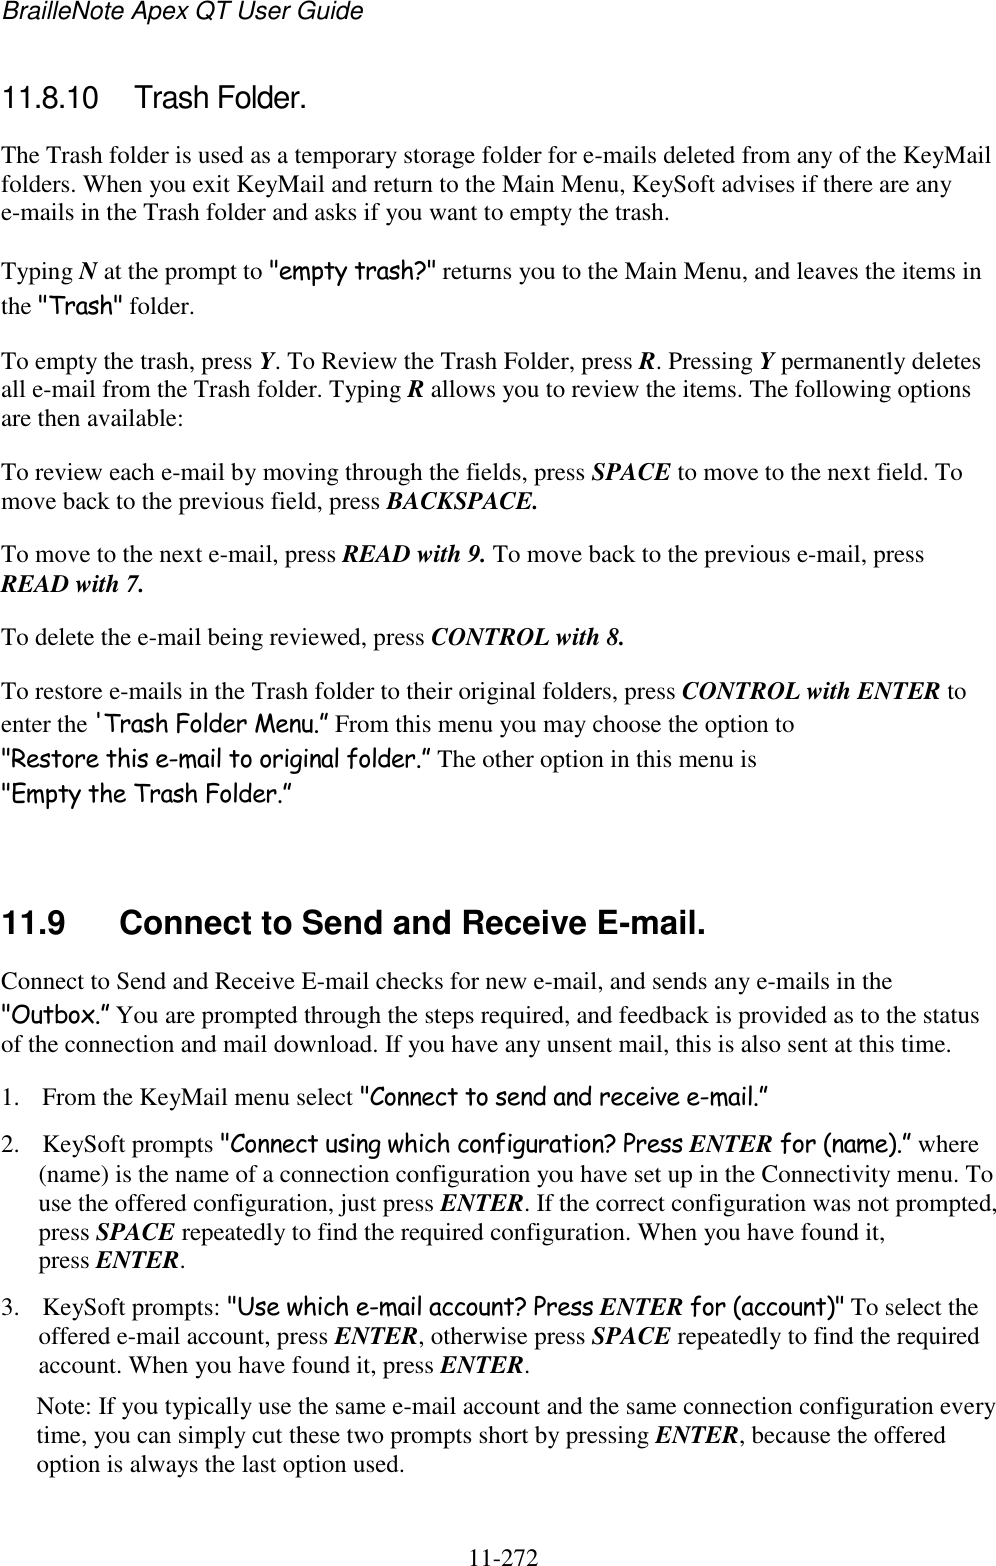 BrailleNote Apex QT User Guide  11-272   11.8.10  Trash Folder. The Trash folder is used as a temporary storage folder for e-mails deleted from any of the KeyMail folders. When you exit KeyMail and return to the Main Menu, KeySoft advises if there are any e-mails in the Trash folder and asks if you want to empty the trash. Typing N at the prompt to &quot;empty trash?&quot; returns you to the Main Menu, and leaves the items in the &quot;Trash&quot; folder. To empty the trash, press Y. To Review the Trash Folder, press R. Pressing Y permanently deletes all e-mail from the Trash folder. Typing R allows you to review the items. The following options are then available: To review each e-mail by moving through the fields, press SPACE to move to the next field. To move back to the previous field, press BACKSPACE. To move to the next e-mail, press READ with 9. To move back to the previous e-mail, press READ with 7. To delete the e-mail being reviewed, press CONTROL with 8. To restore e-mails in the Trash folder to their original folders, press CONTROL with ENTER to enter the &apos;Trash Folder Menu.” From this menu you may choose the option to &quot;Restore this e-mail to original folder.” The other option in this menu is &quot;Empty the Trash Folder.”   11.9  Connect to Send and Receive E-mail. Connect to Send and Receive E-mail checks for new e-mail, and sends any e-mails in the &quot;Outbox.” You are prompted through the steps required, and feedback is provided as to the status of the connection and mail download. If you have any unsent mail, this is also sent at this time. 1. From the KeyMail menu select &quot;Connect to send and receive e-mail.” 2. KeySoft prompts &quot;Connect using which configuration? Press ENTER for (name).” where (name) is the name of a connection configuration you have set up in the Connectivity menu. To use the offered configuration, just press ENTER. If the correct configuration was not prompted, press SPACE repeatedly to find the required configuration. When you have found it, press ENTER. 3. KeySoft prompts: &quot;Use which e-mail account? Press ENTER for (account)&quot; To select the offered e-mail account, press ENTER, otherwise press SPACE repeatedly to find the required account. When you have found it, press ENTER. Note: If you typically use the same e-mail account and the same connection configuration every time, you can simply cut these two prompts short by pressing ENTER, because the offered option is always the last option used. 